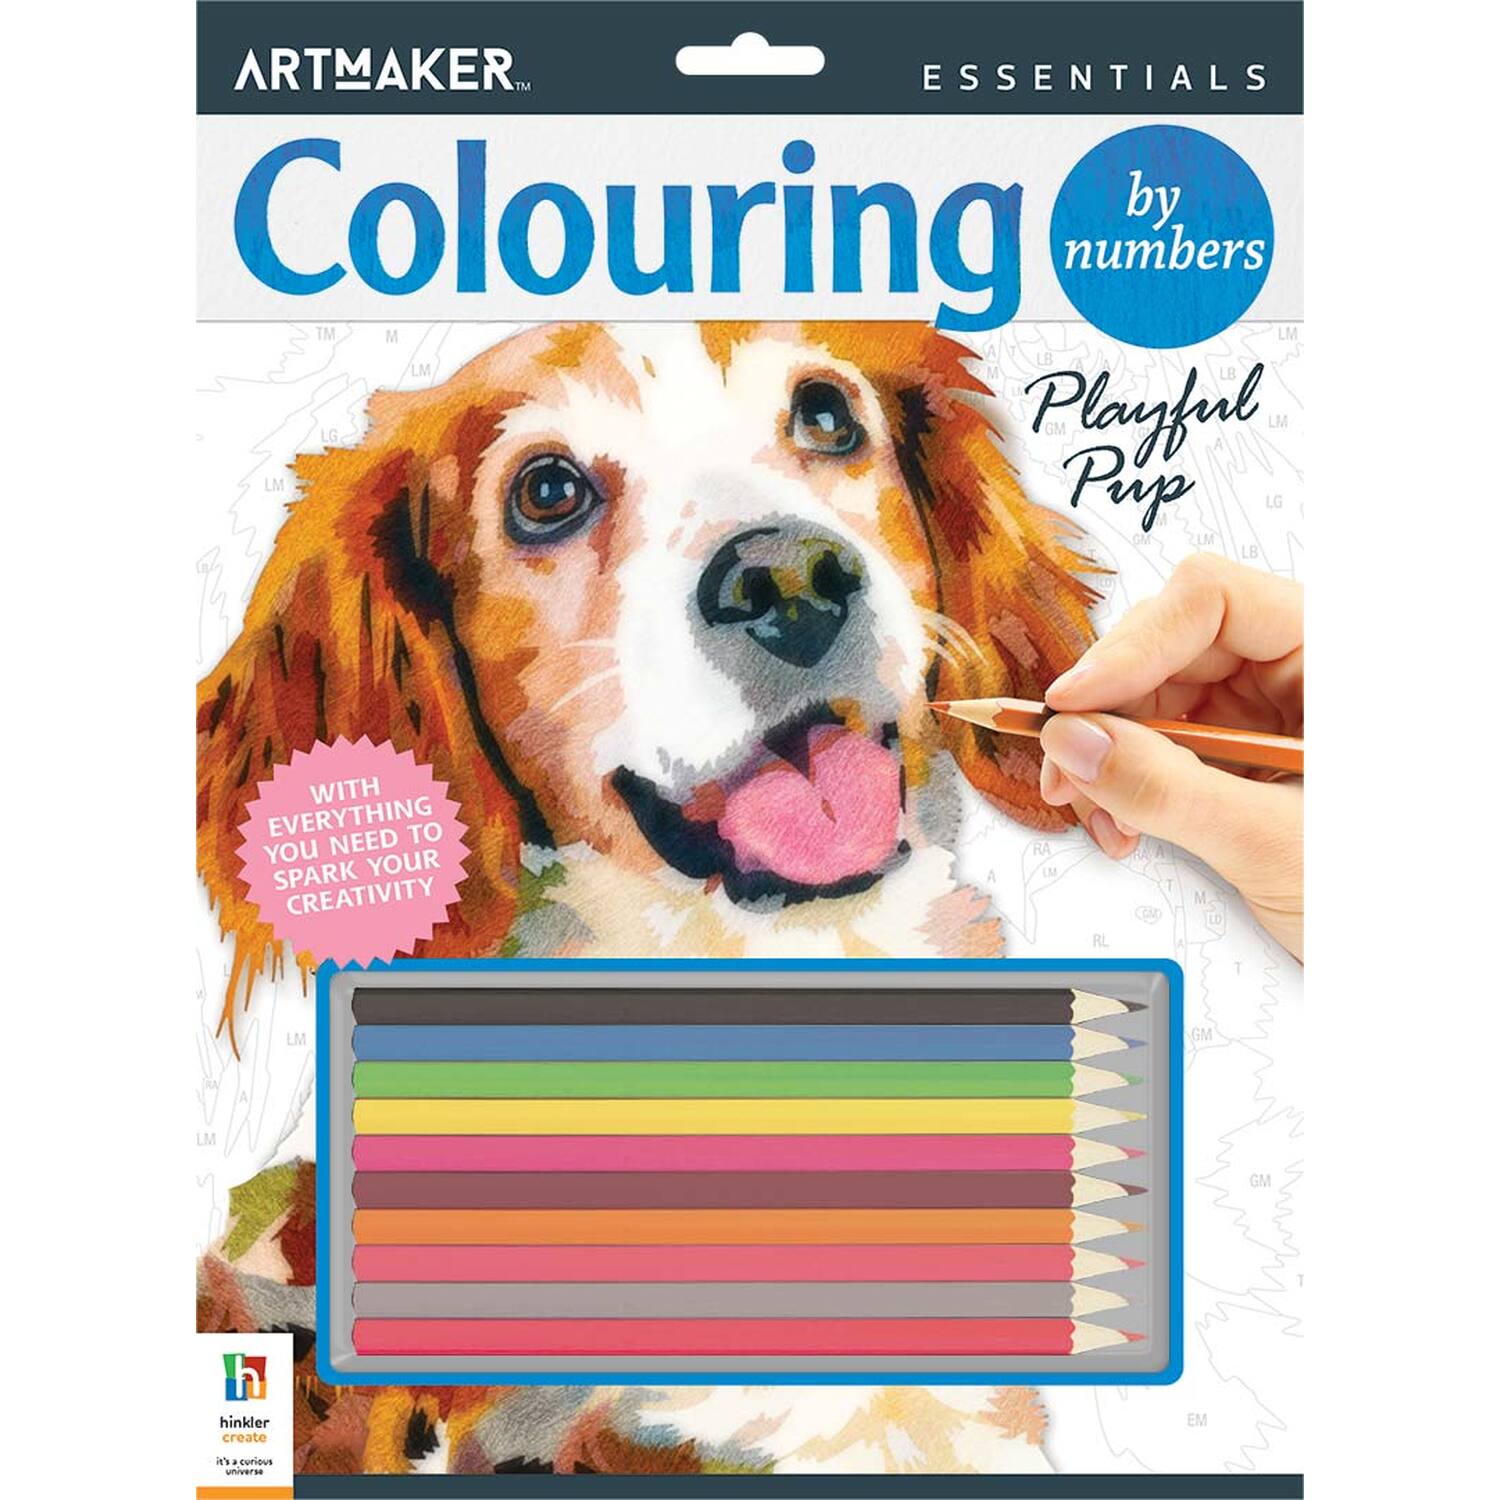 Art Maker Essentials Colouring by Numbers Kit - Playful Pup Image